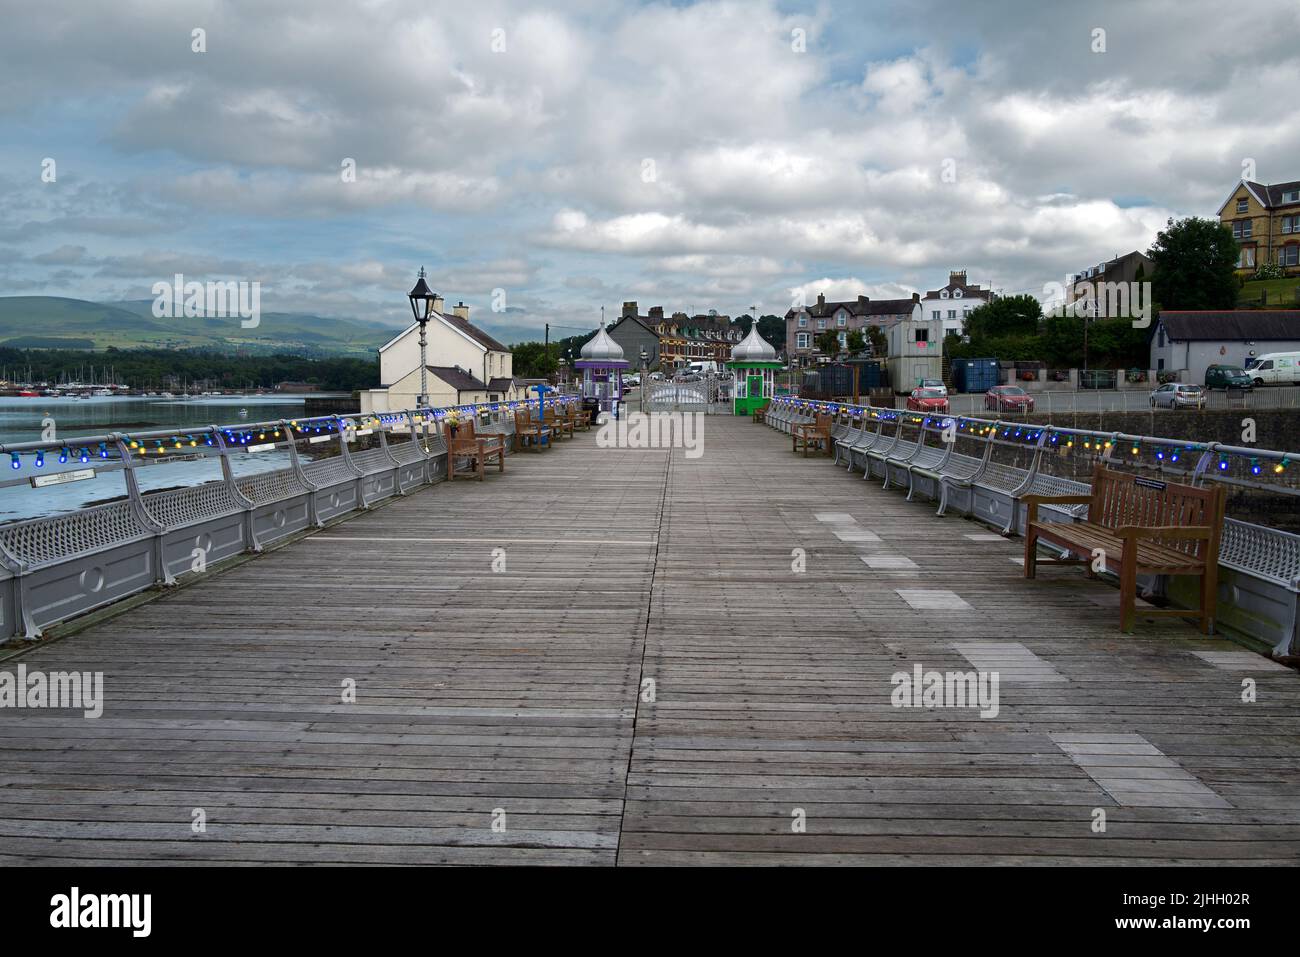 Garth Pier in Bangor, North Wales, was opened in 1896. It is now a Grade II listed structure and the second longest pier in Wales. Stock Photo